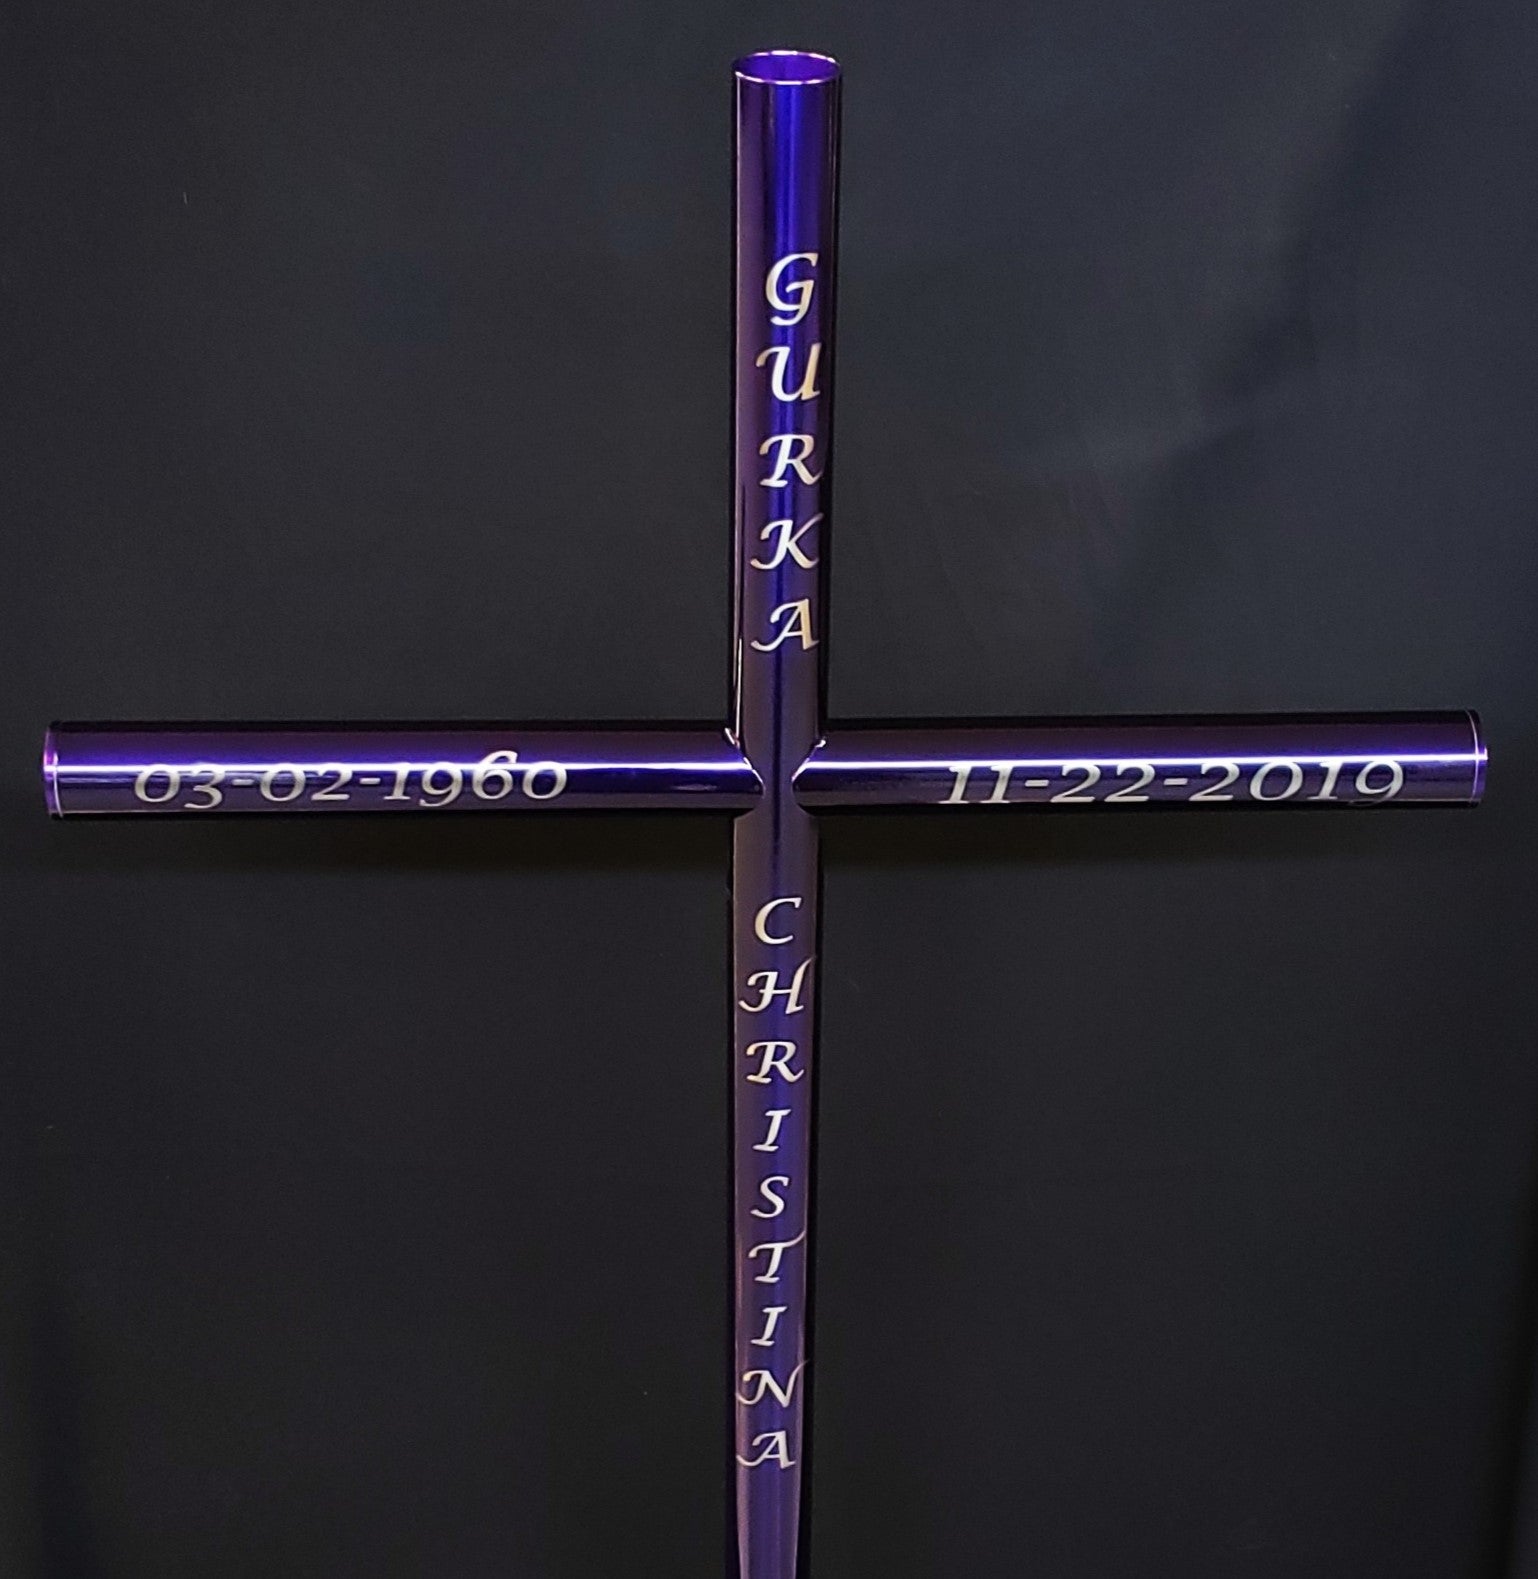 Everlasting Cross Urn Memorial is Customized Engraving on Four Sides. Keepsake Memoriaal for Gardens, Funeral at Pet Cemetery or Outdoor Roadside. Loved One Passed Will Symbolized And Their Memories Will Be Everlasting. Urn for Their Ashes Wil Be A Timeless Keepsake or Memorial Jewelry